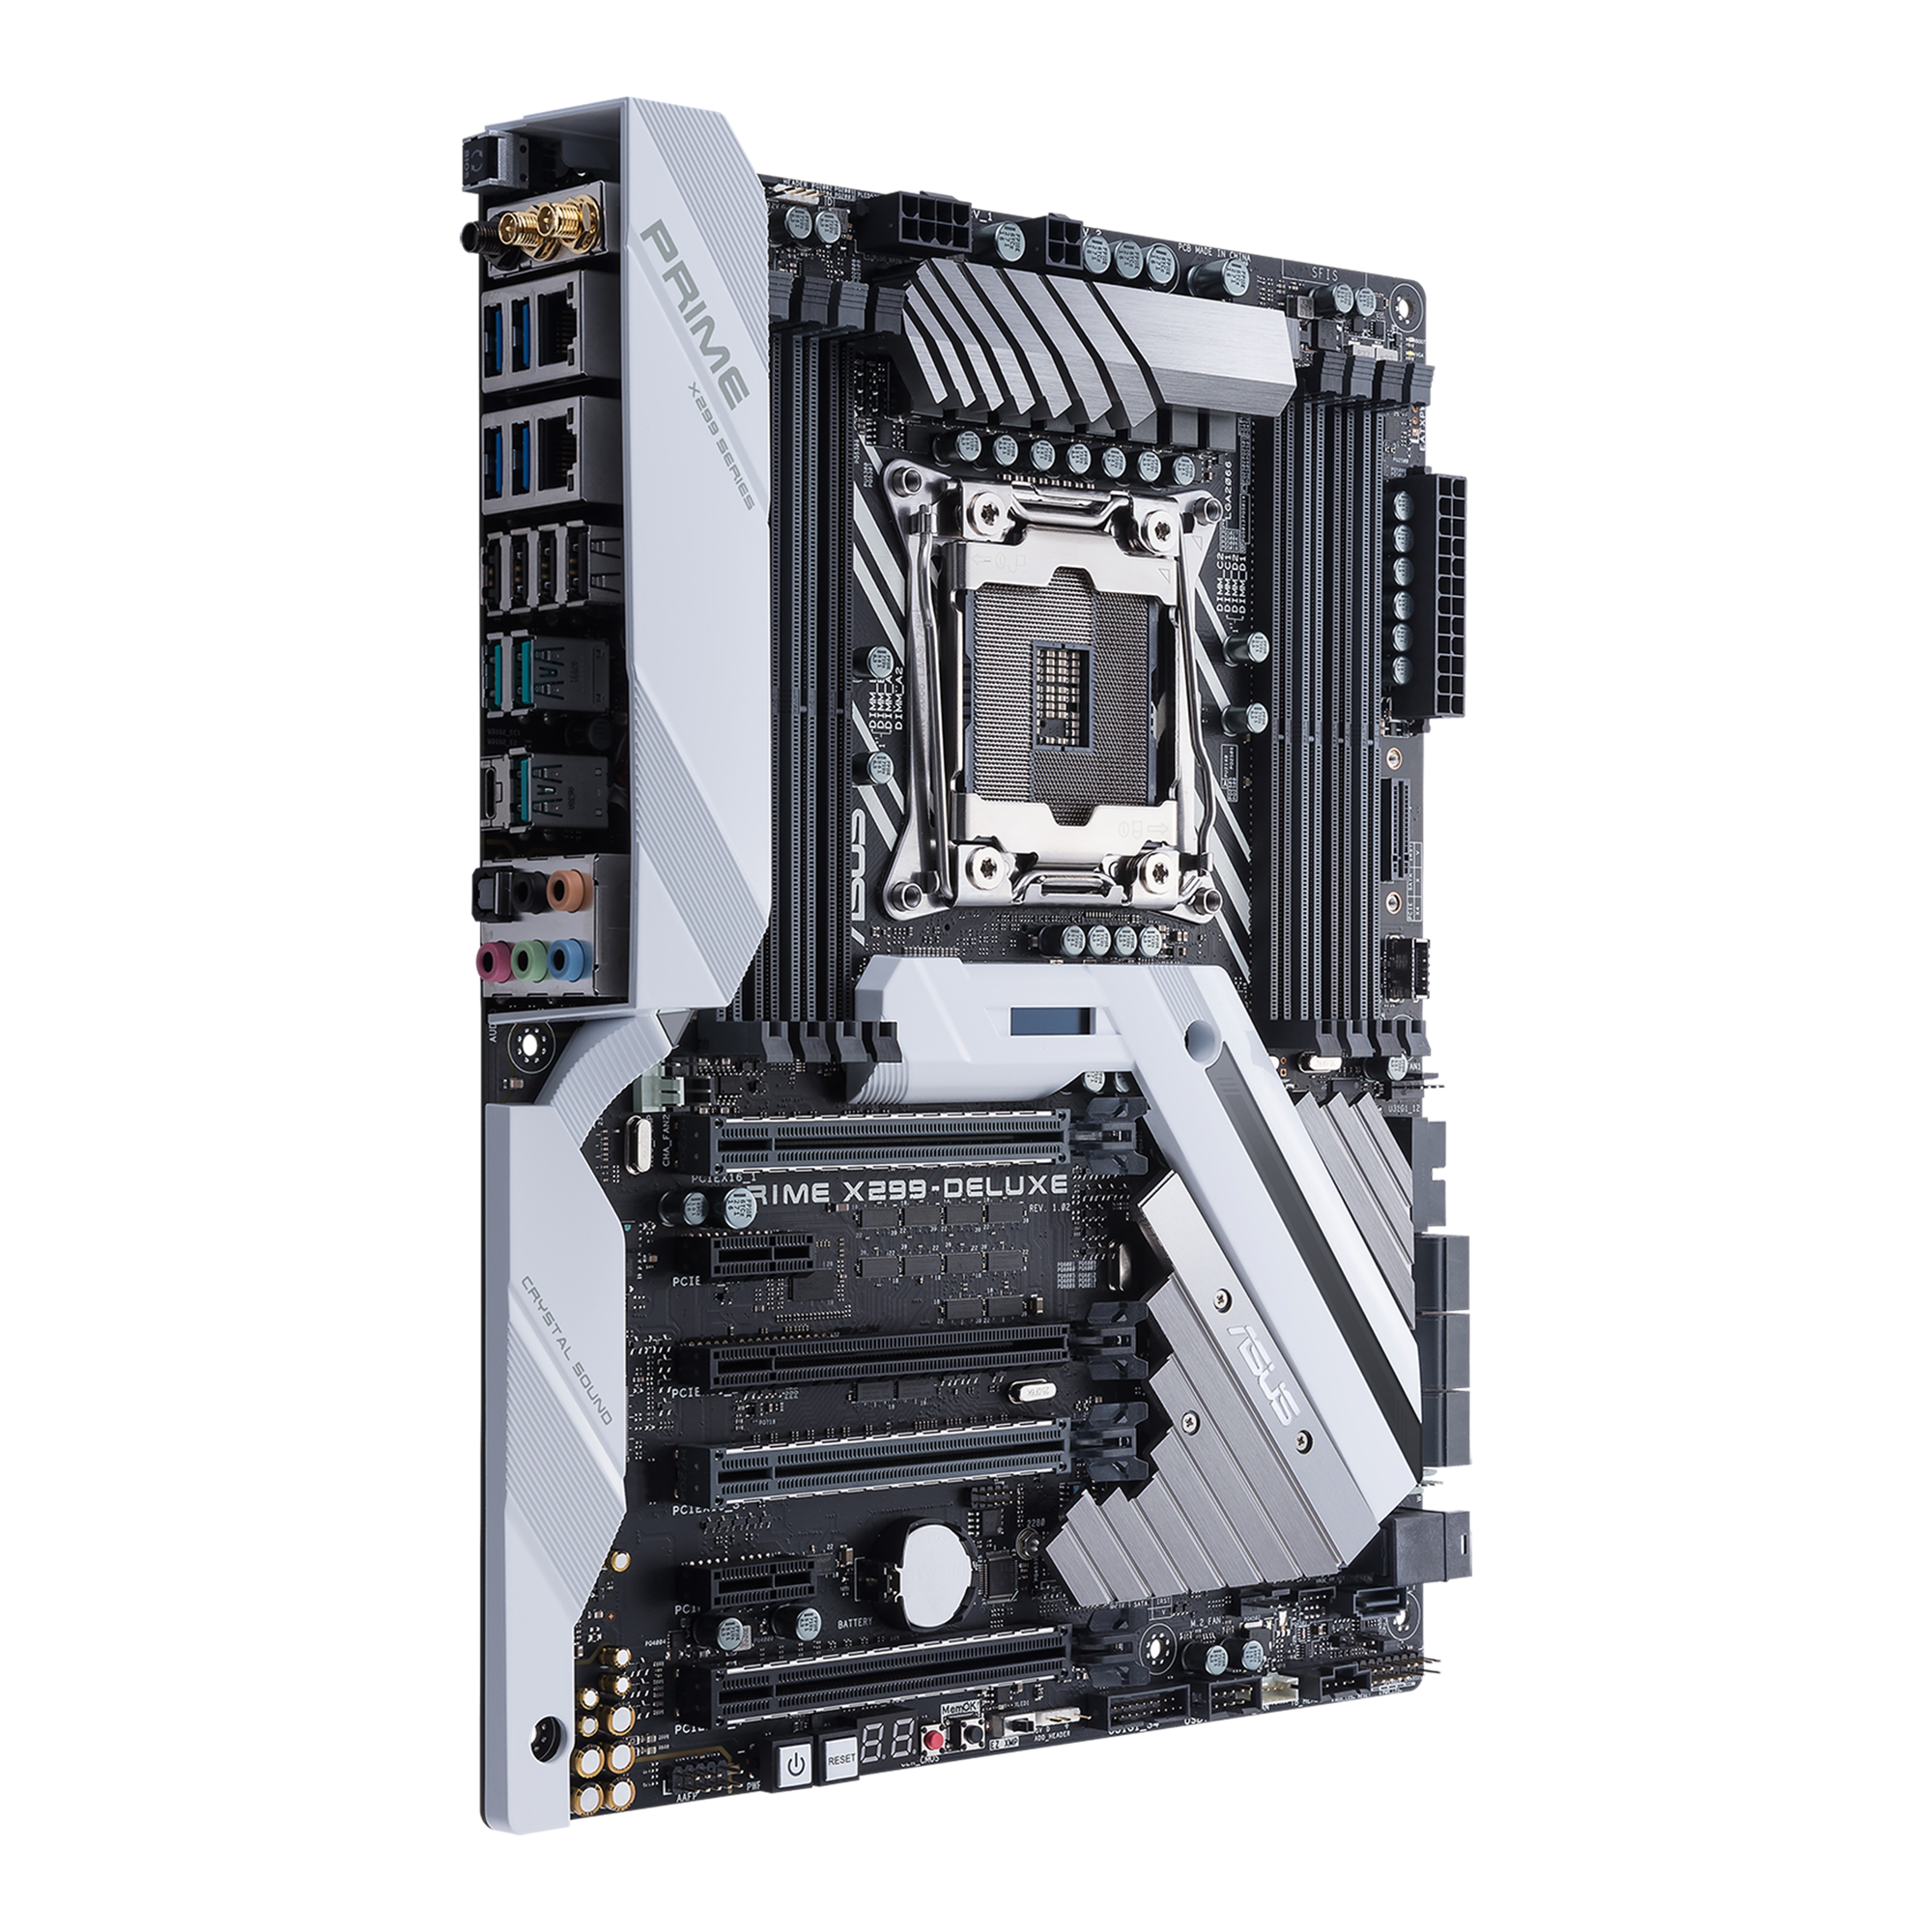 PRIME X299-DELUXE｜Motherboards｜ASUS Philippines